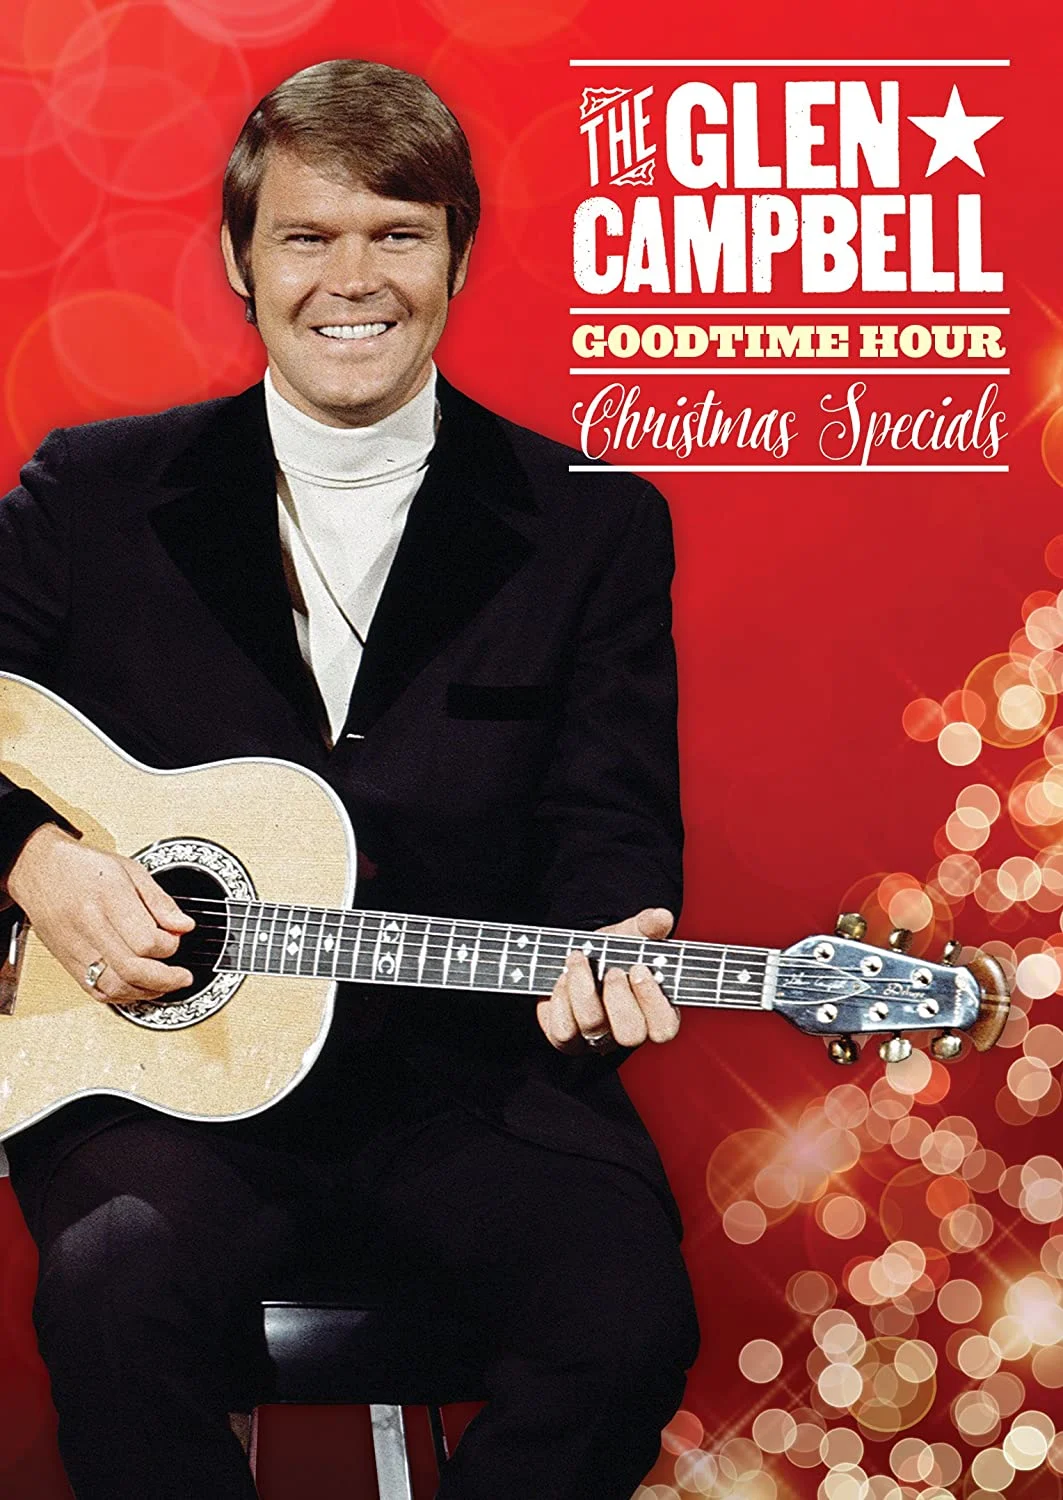 Glen Campbell Goodtime Hour: Christmas Specials (DVD) on MovieShack